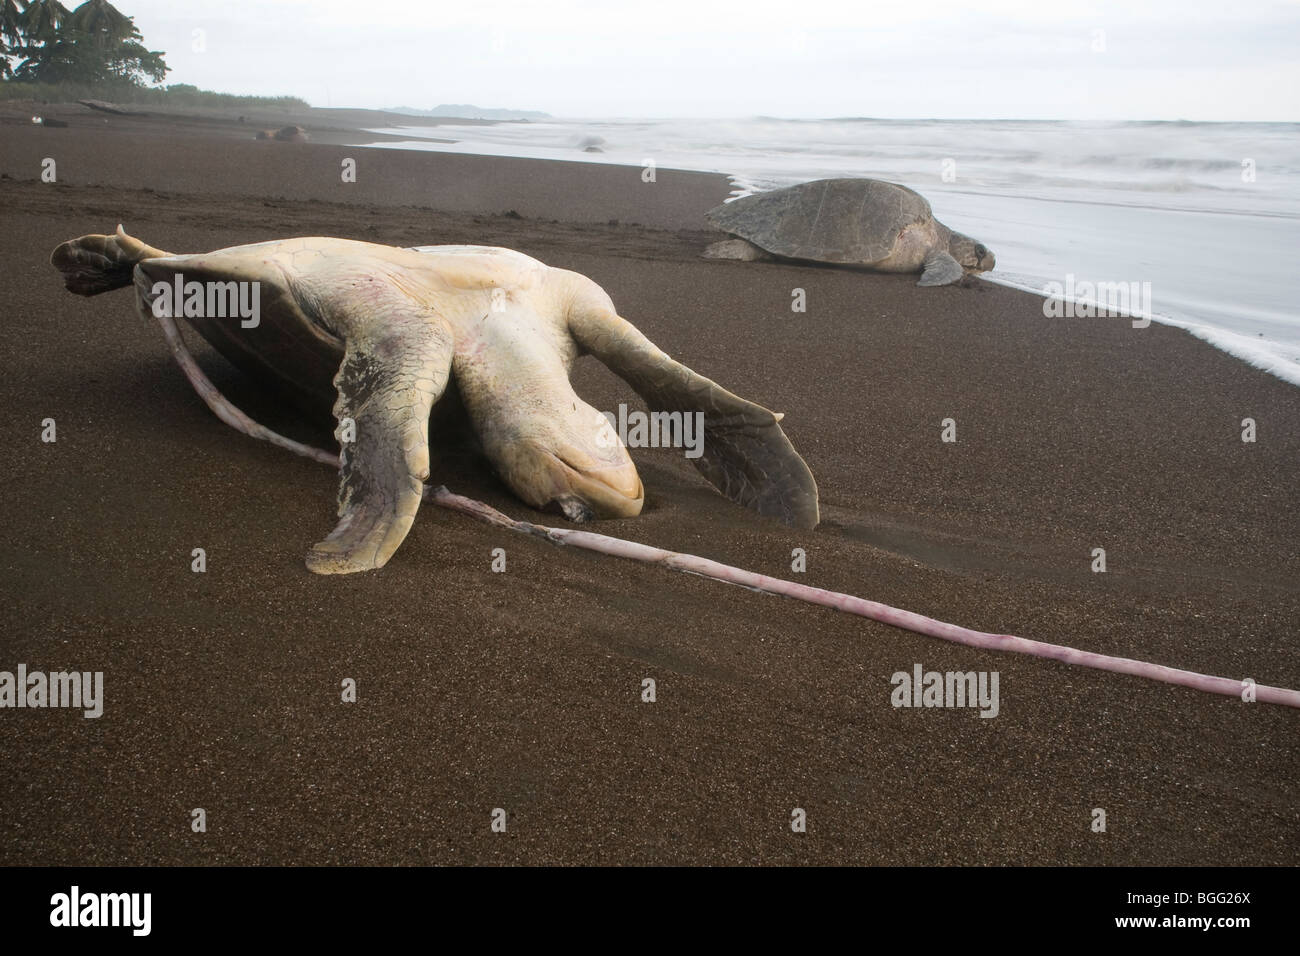 Dead Olive ridley sea turtles, Lepidochelys olivacea (an endangered species), washed up on a beach in Costa Rica. Stock Photo